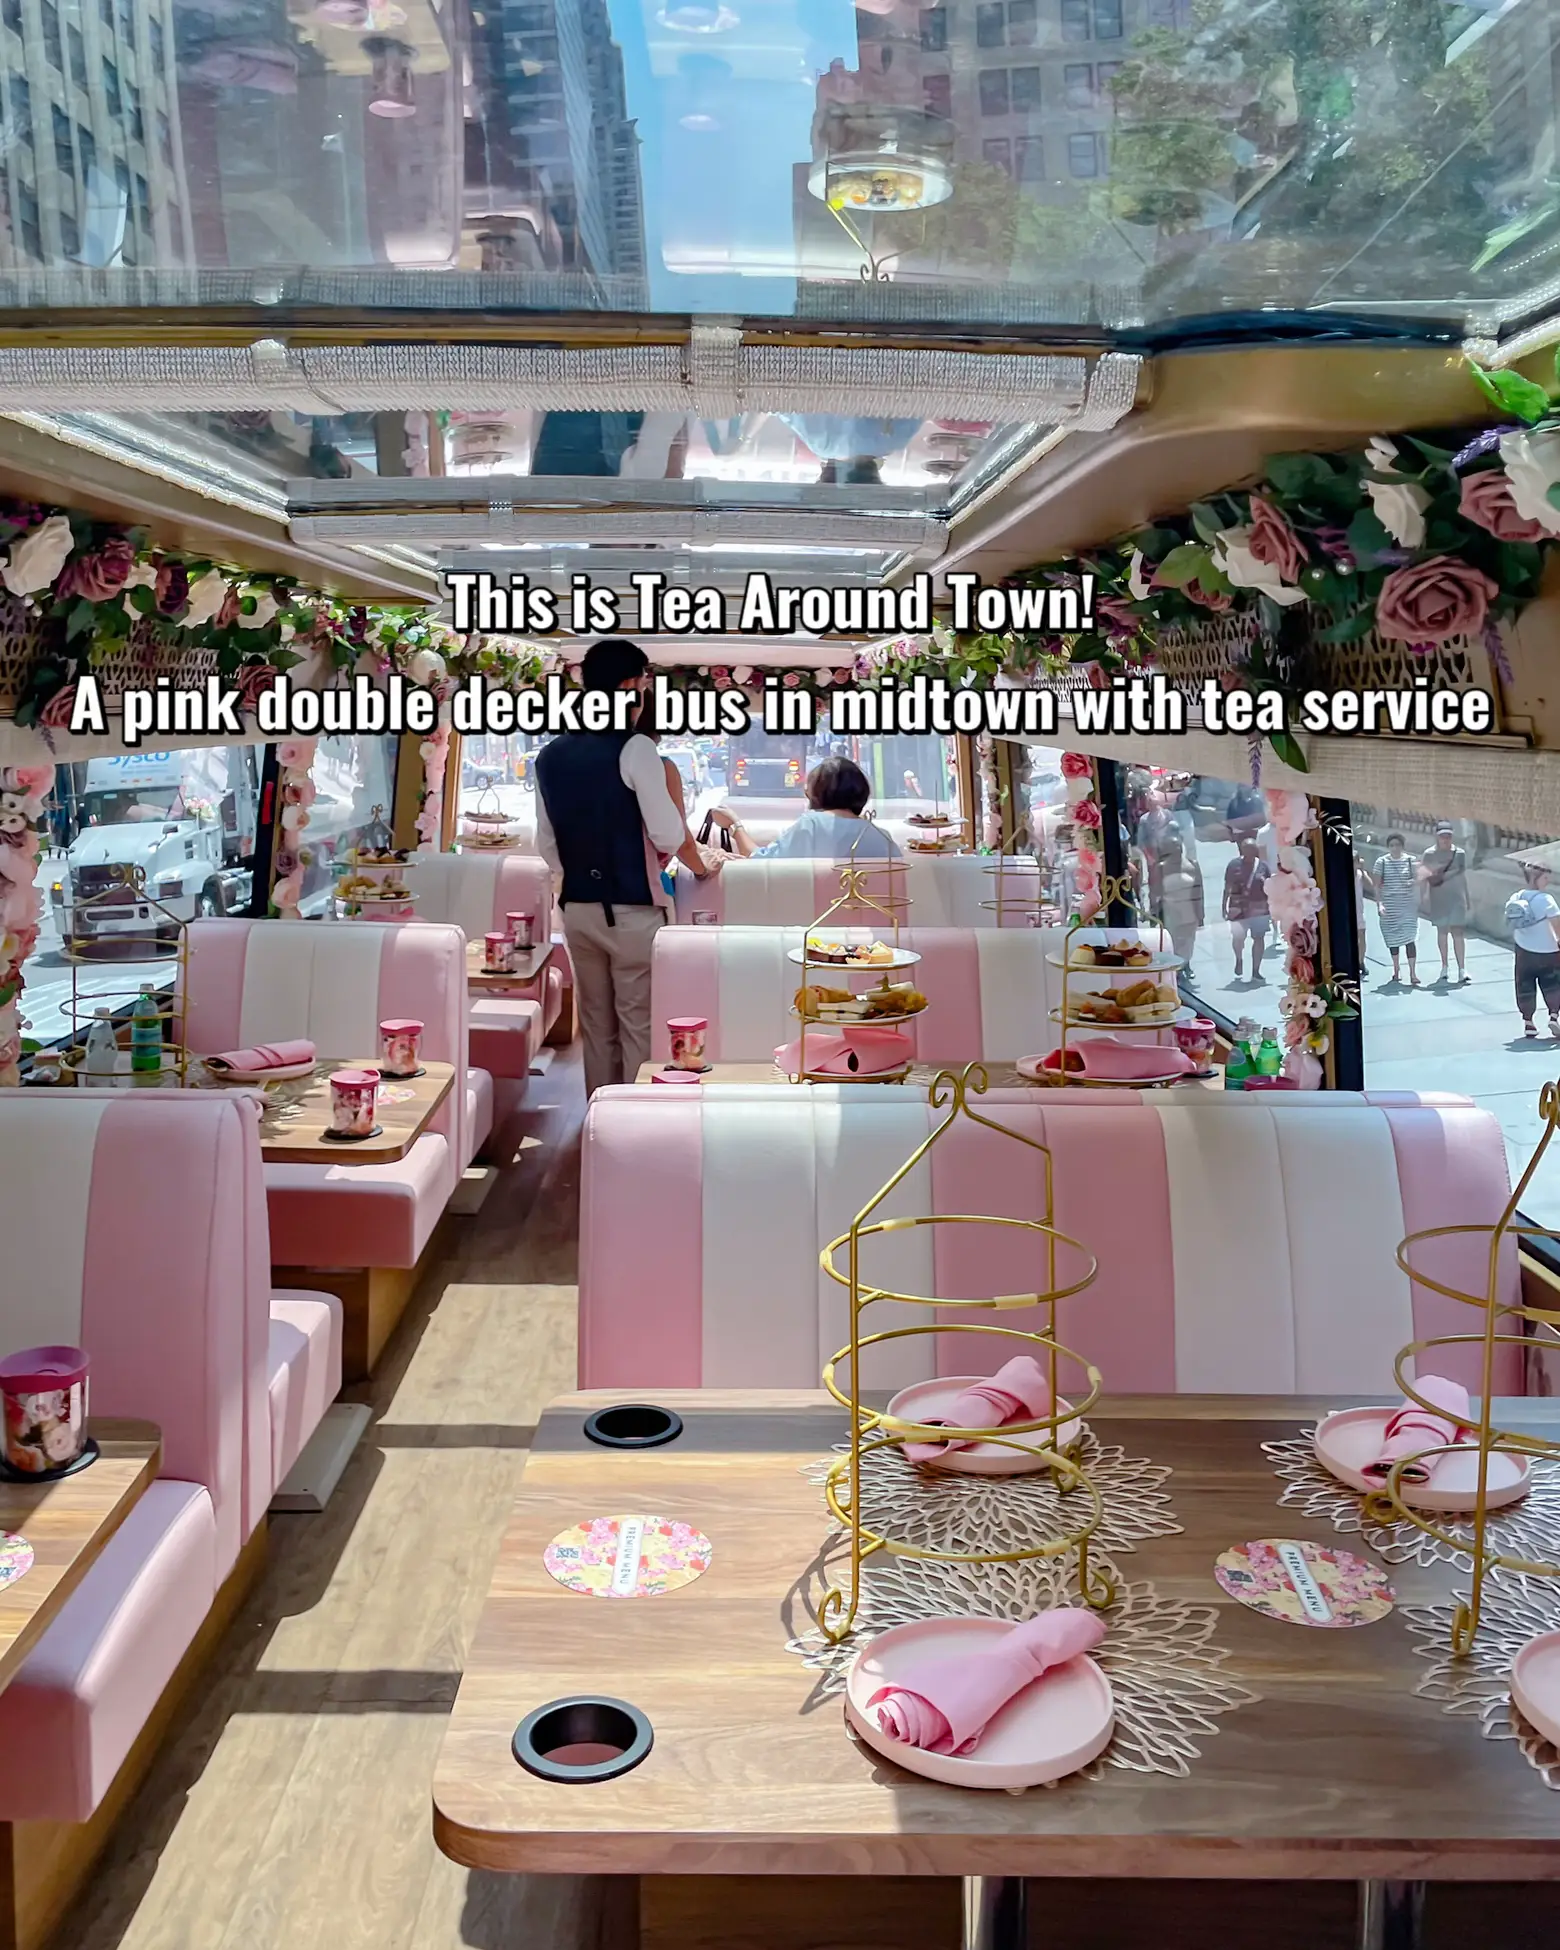  A pink double decker bus in midtown with tea service.